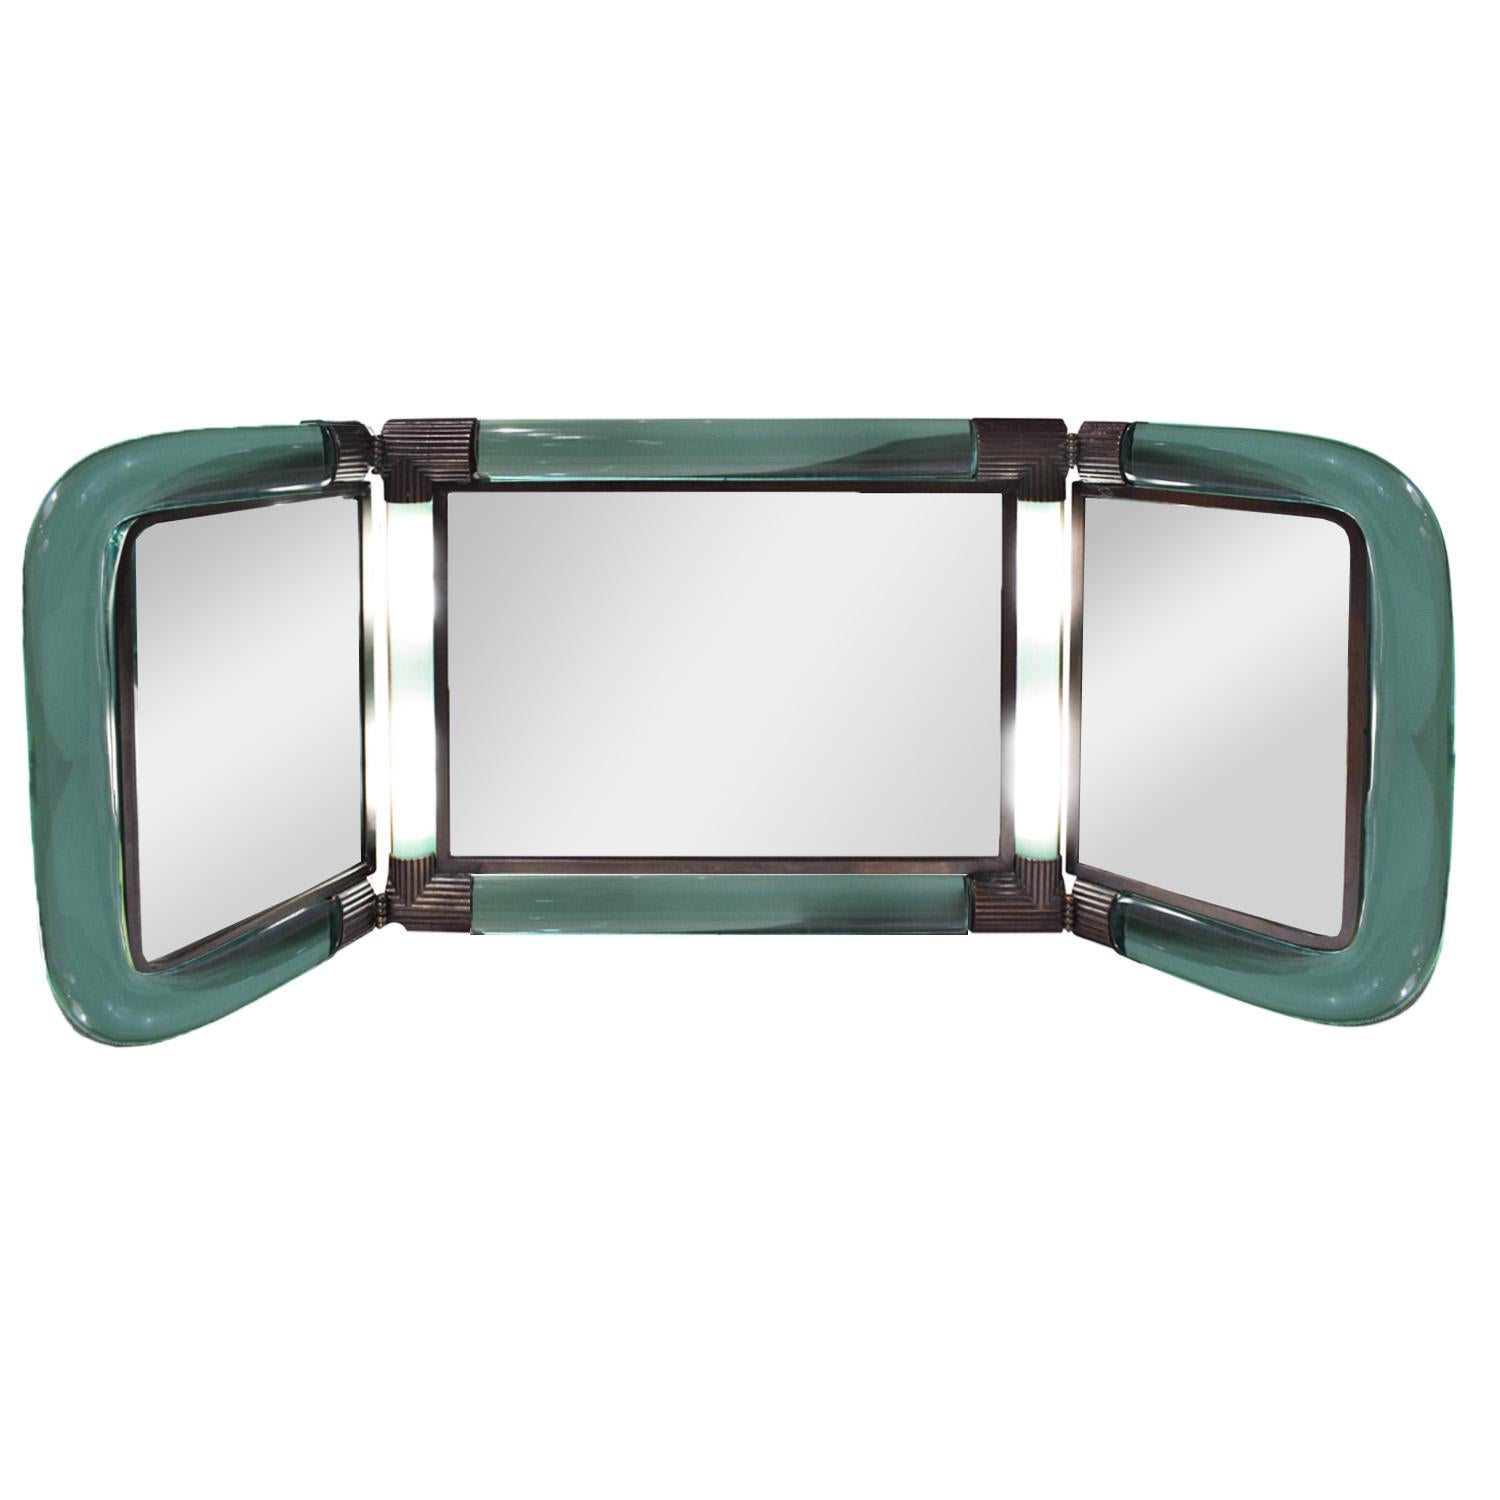 Exceptional and rare 3-part illuminating vanity mirror in hand blown green glass with artisan bronze fittings by Seguso (Murano Italy) for Karl Springer, American, 1980s (etched “KARL SPRINGER” in glass). Very few of these were made and the